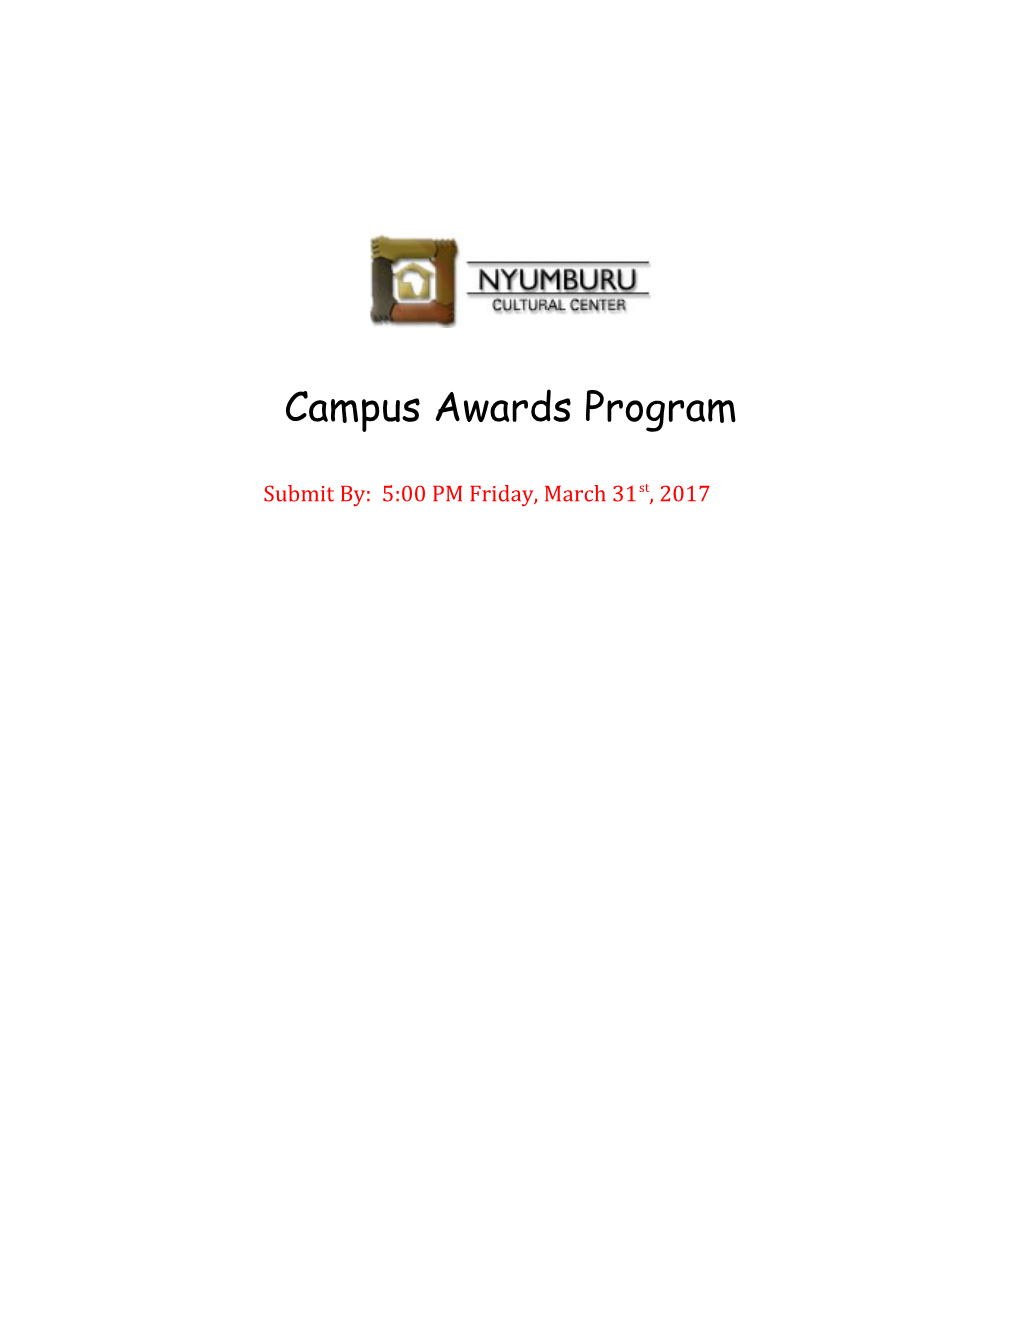 Campus Awards Program Application Due: 5:00 PM Friday, March 31St, 2017